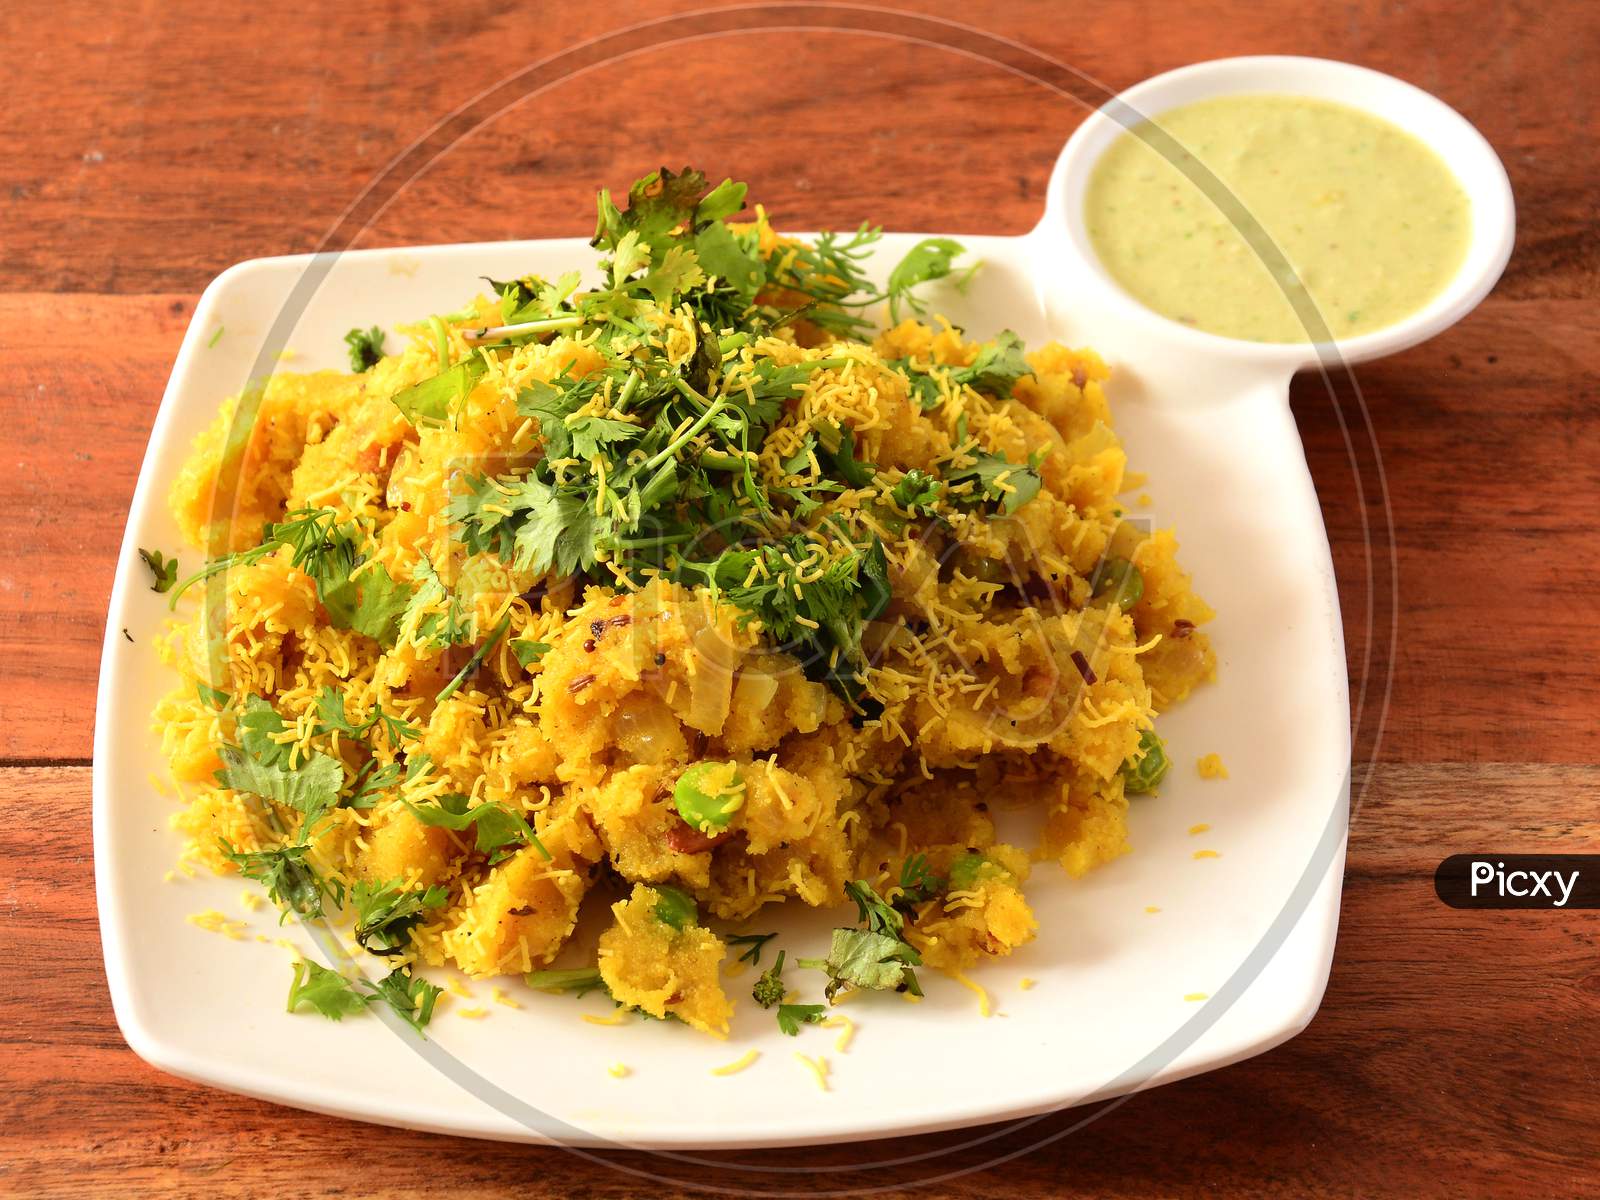 Upma With Coconut Chutney. Upma Made Of Semolina, A South Indian Breakfast Also Popular In Maharashtra,India Served Over Rustic Wooden Background, Selective Focus